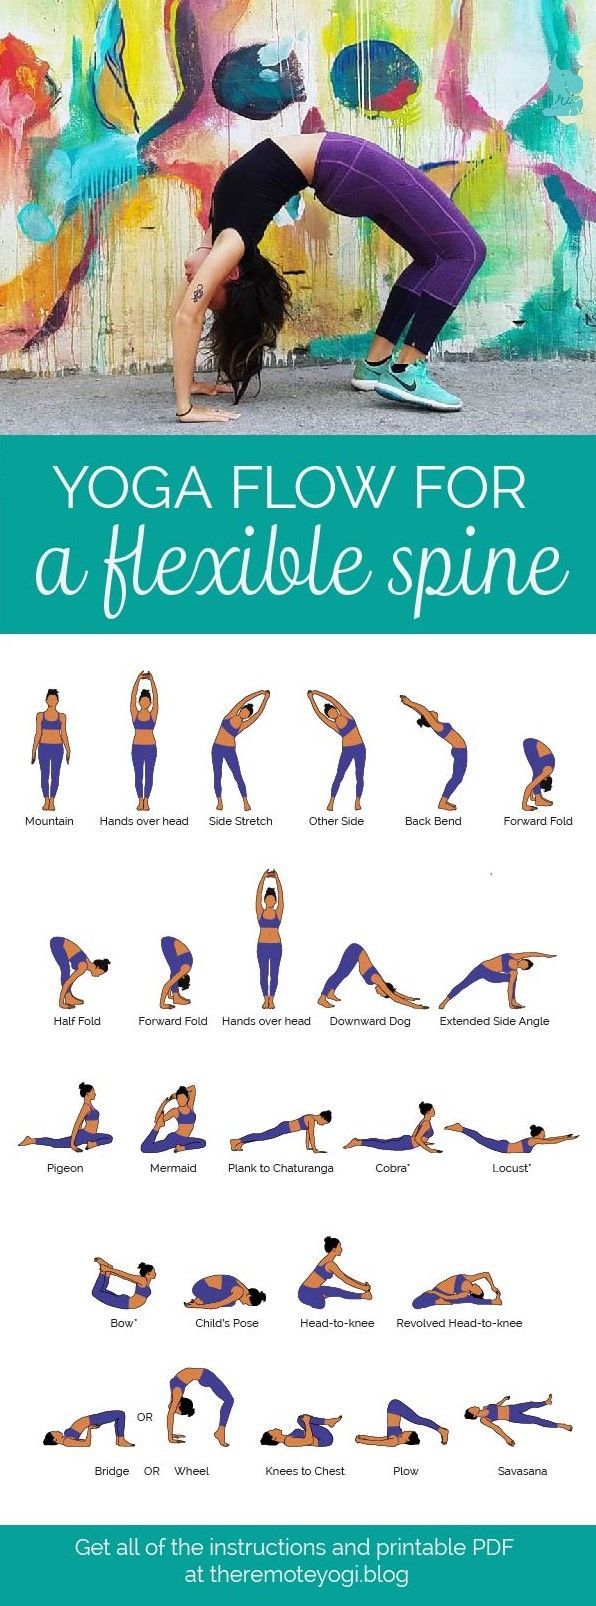 Yoga Flow for a Flexible, Bendy Spine - FREE PDF Print out this yoga flow and do...